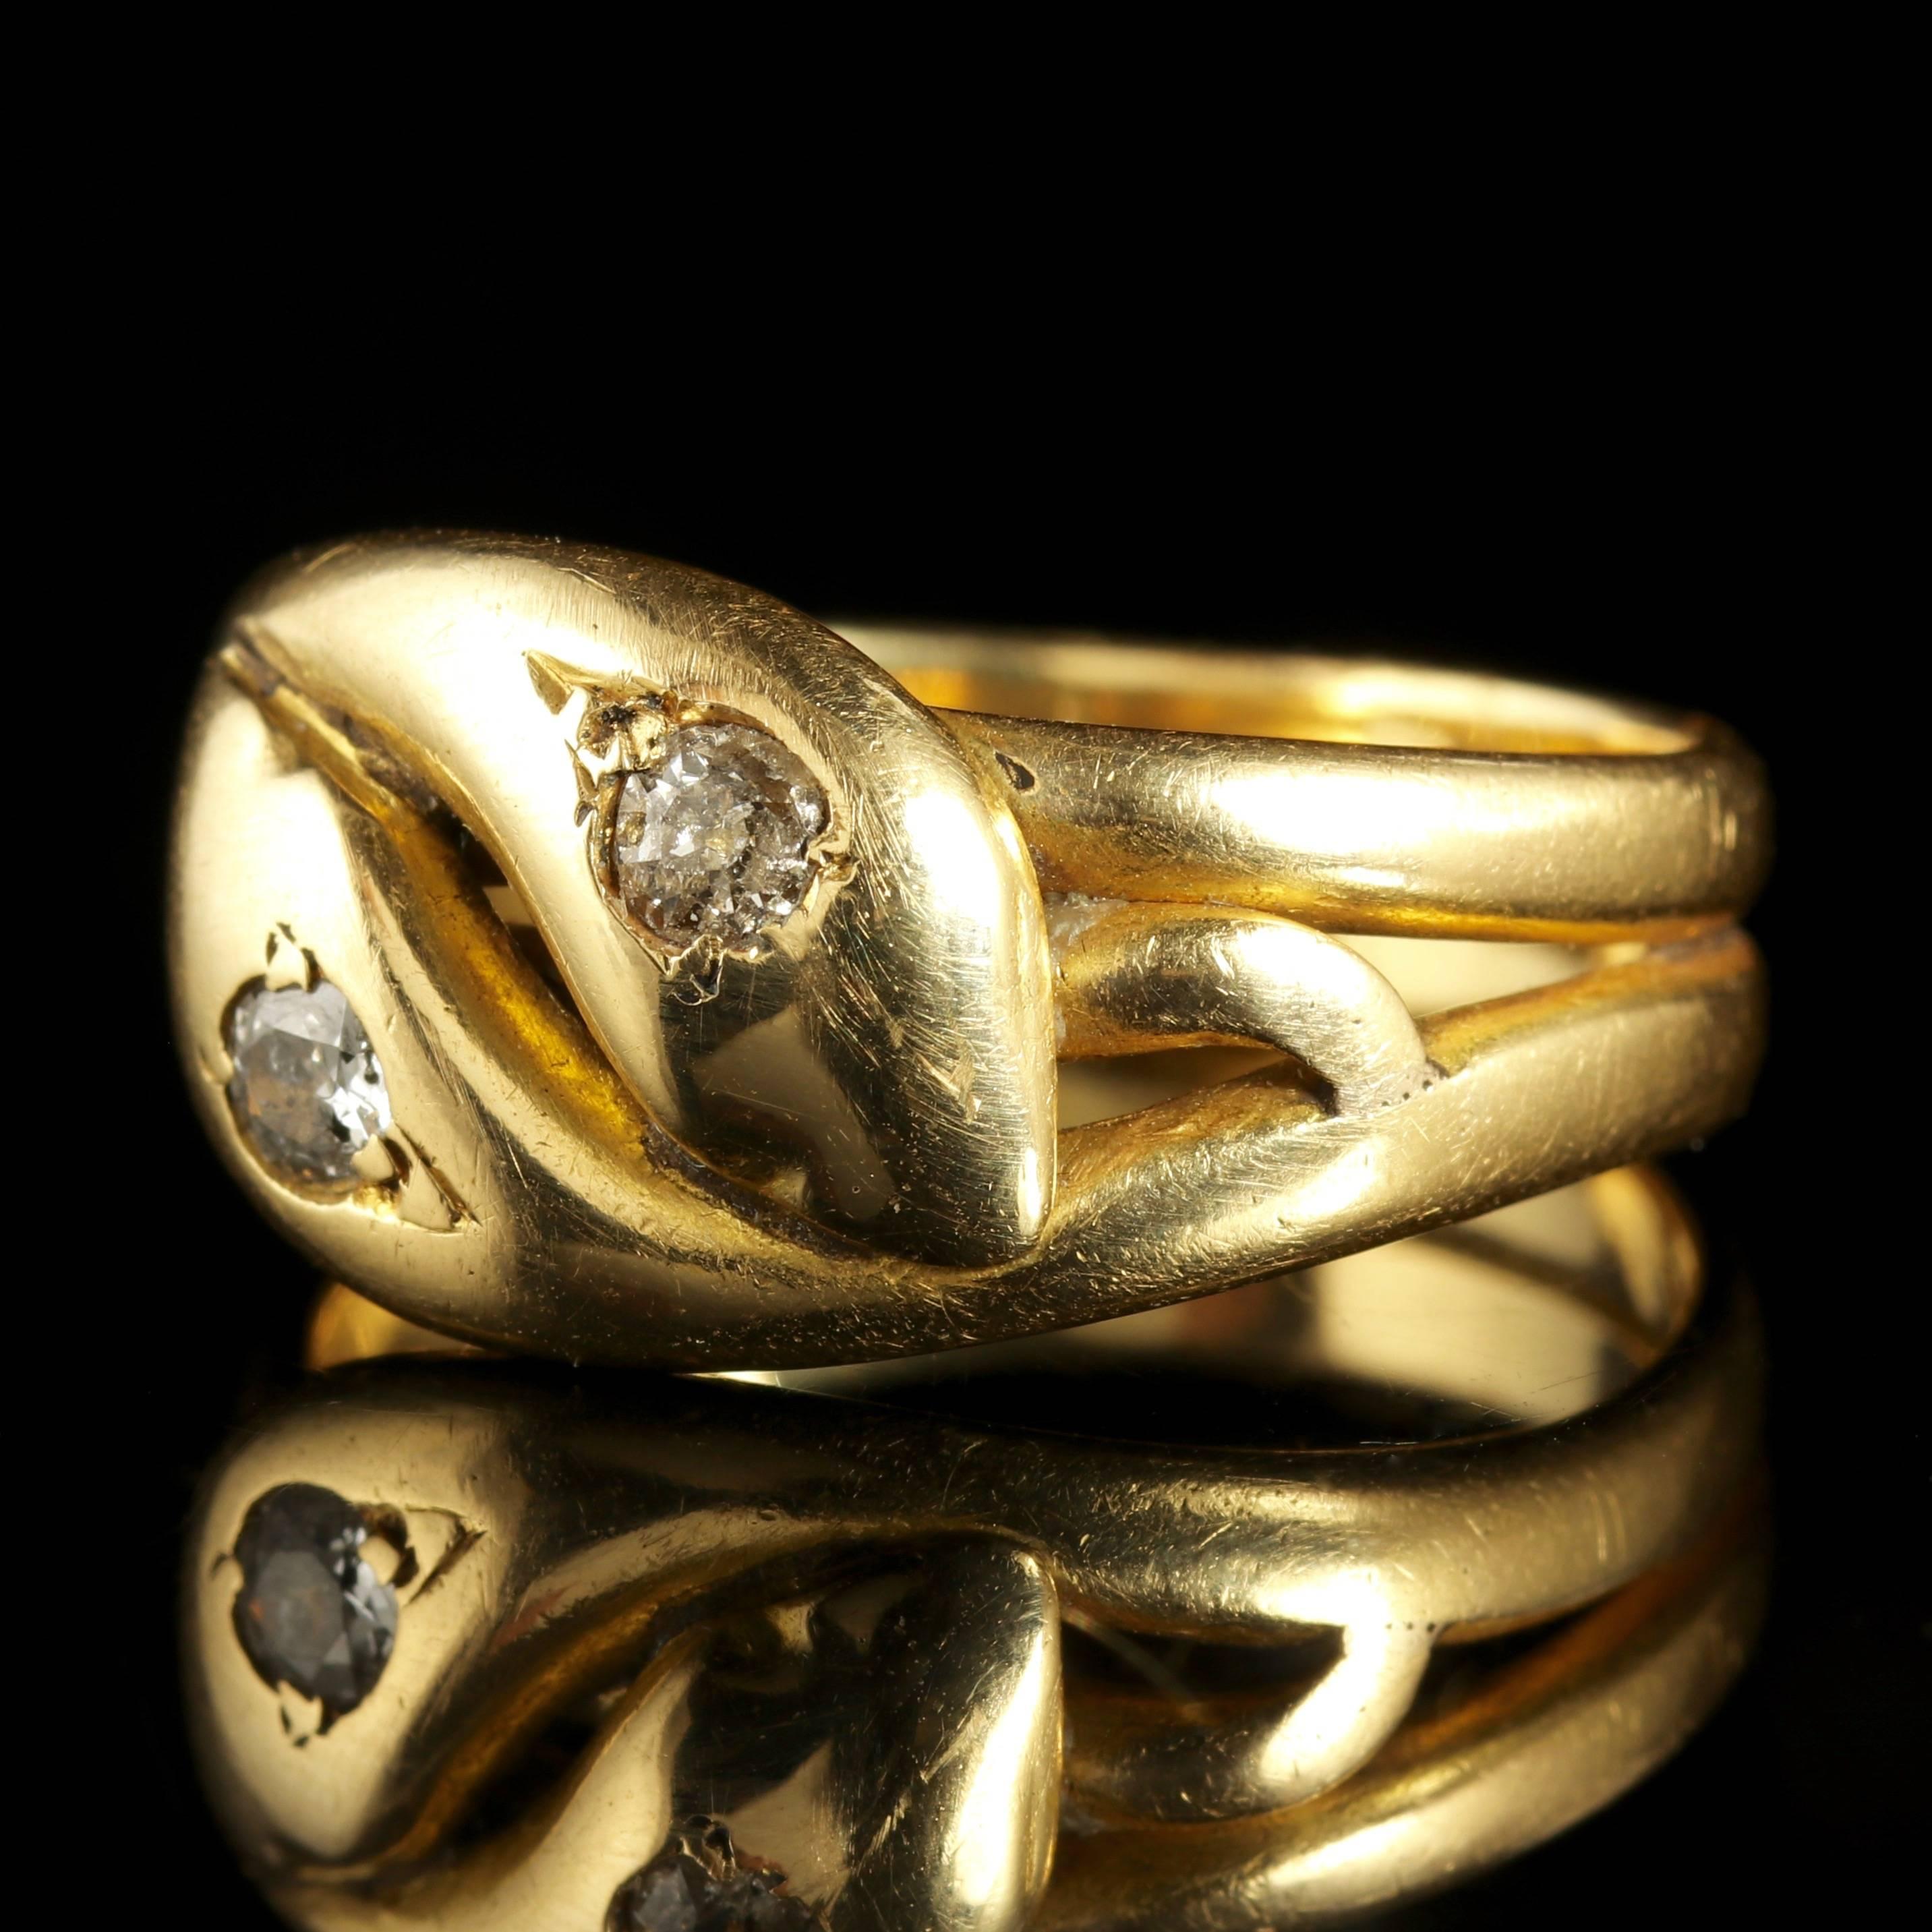 This fabulous 18ct Yellow Gold Victorian snake ring is fully hallmarked London 1898.

Serpent jewellery became popular during the early years of Queen Victoria’s reign coinciding with the full flowering of the Romantic Movement. 

Serpents represent